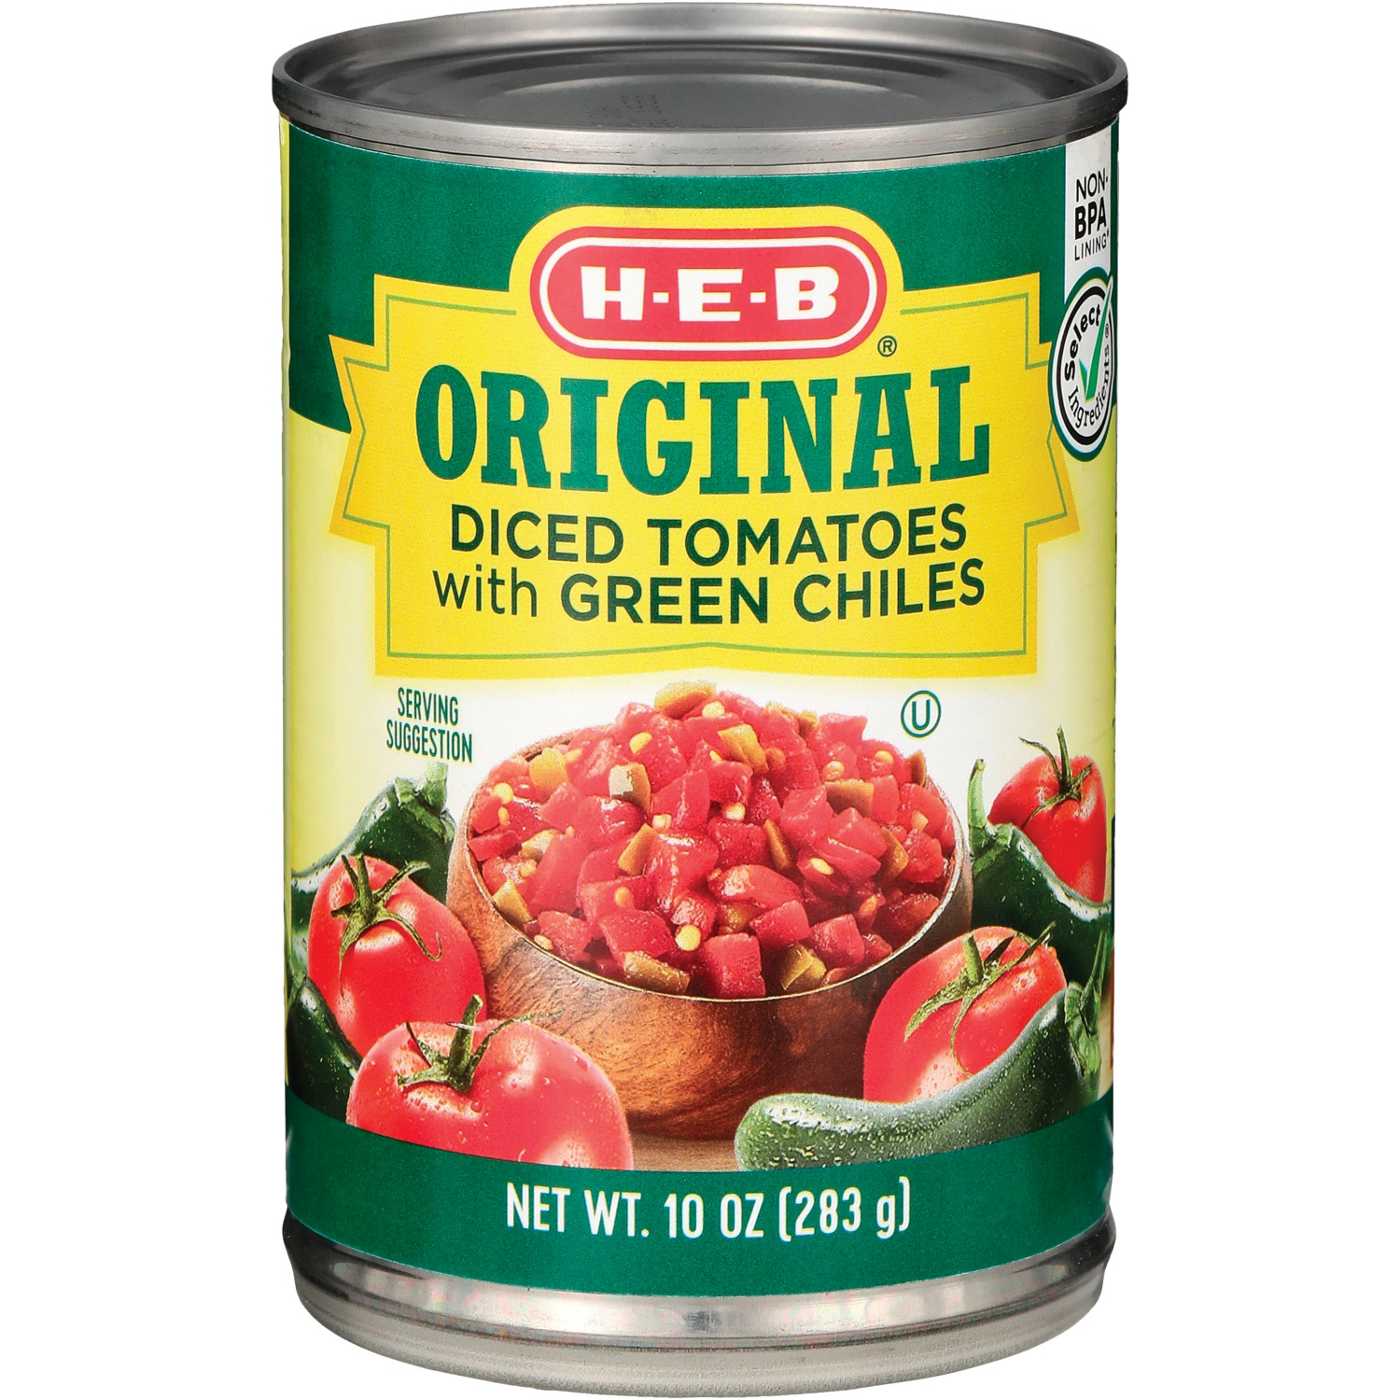 H-E-B Diced Tomatoes with Green Chiles - Original; image 2 of 2